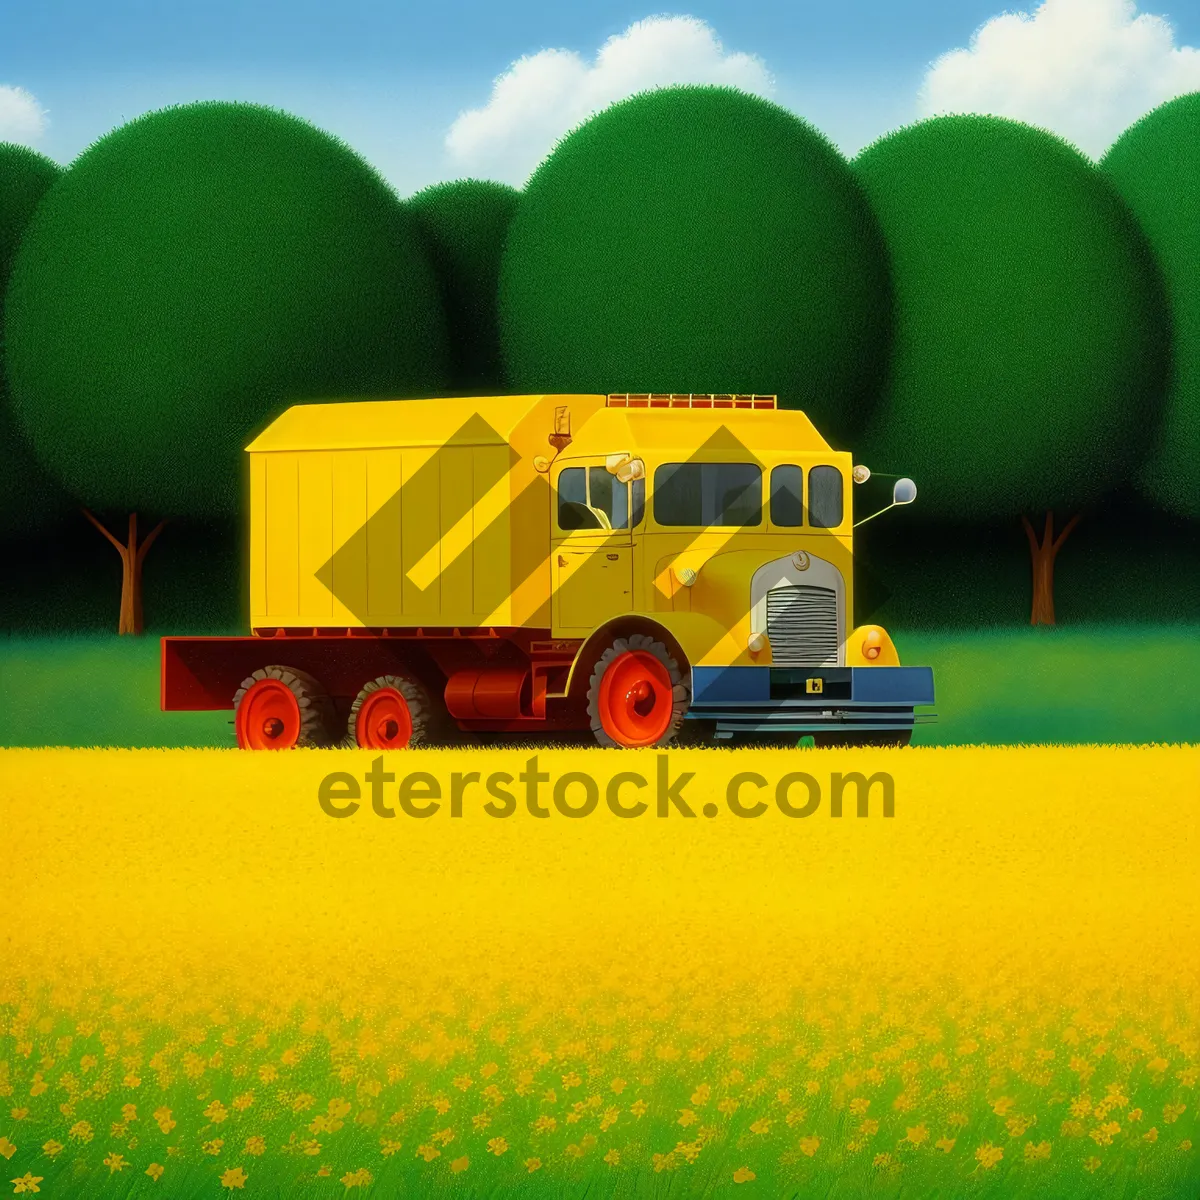 Picture of Vibrant Skyline with Colorful Machinery in a Rural Landscape